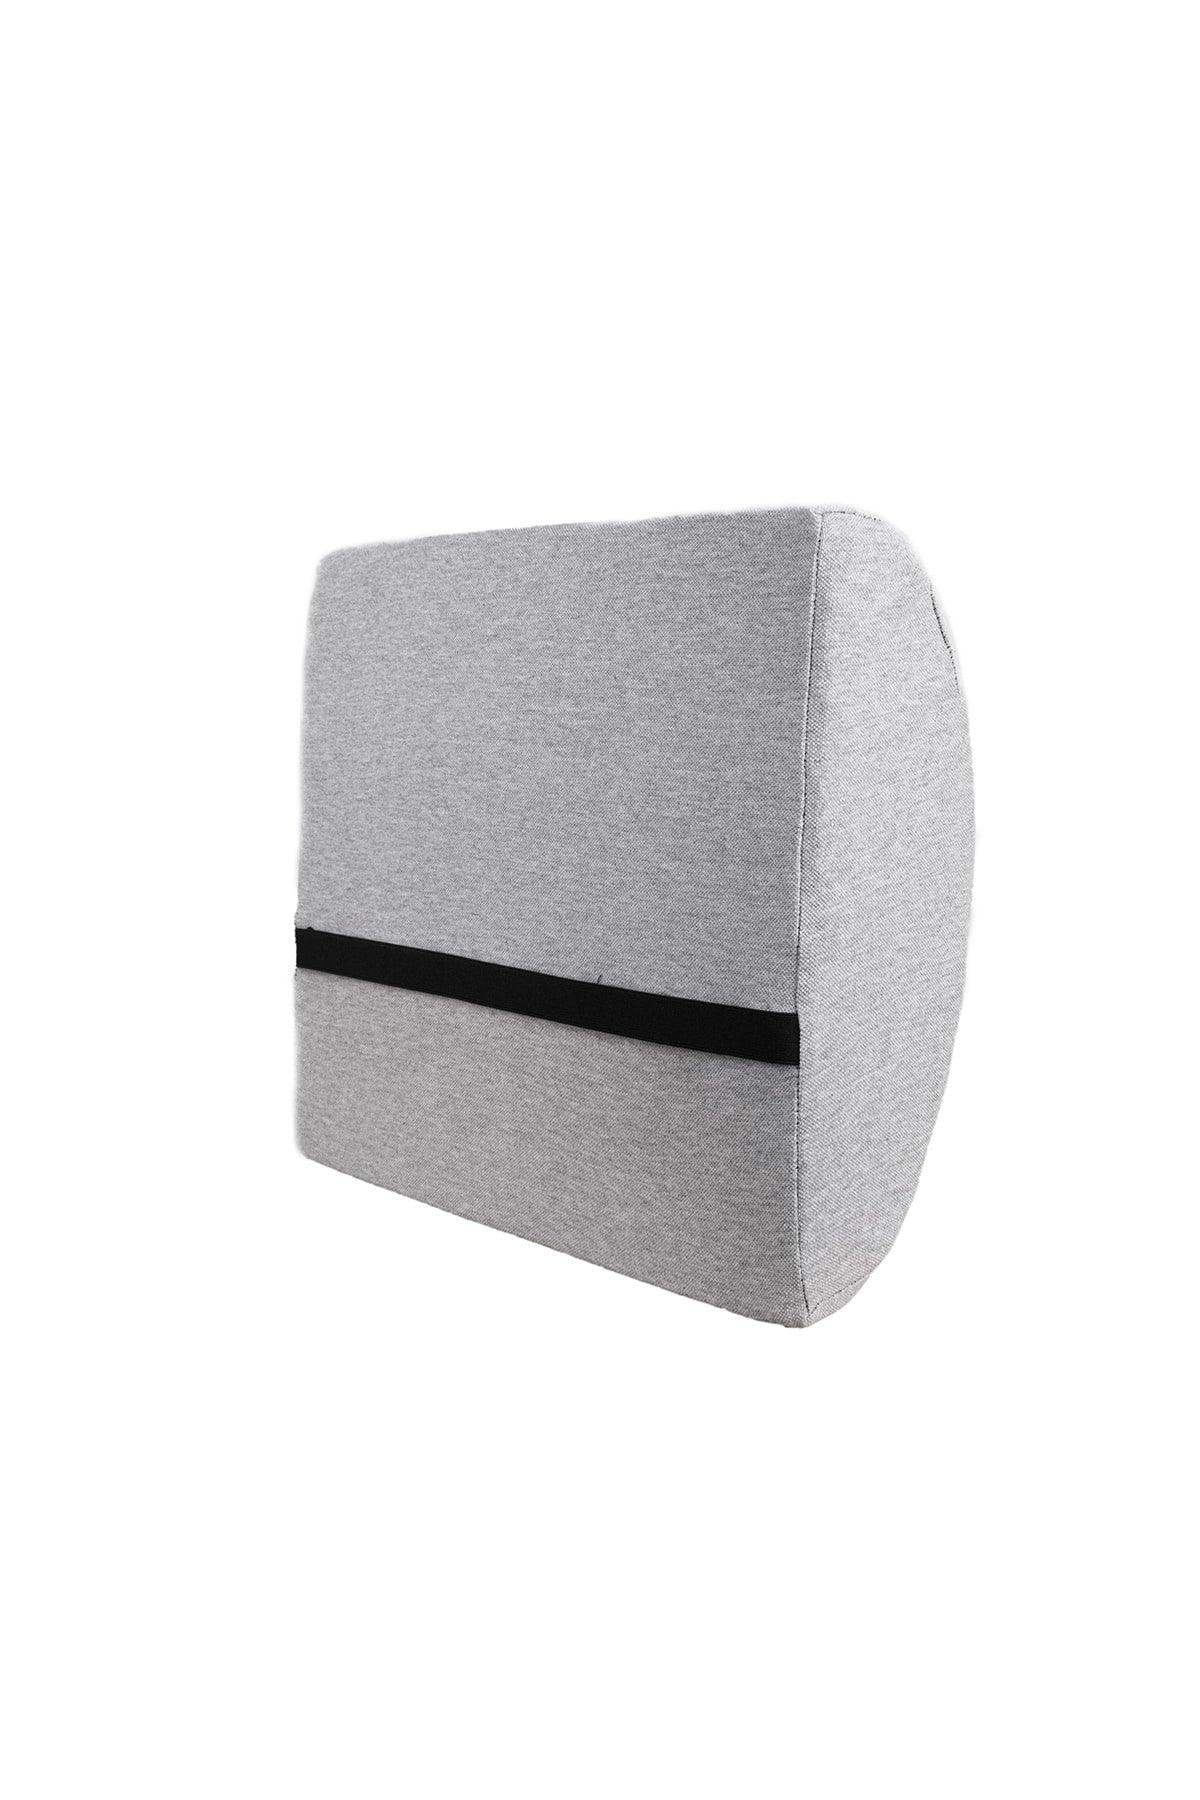 Visco Lumbar And Back Cushion Pillow Auto Vehicle Office Seat Back Lumbar Supporting Cushion Pillow Gray Color - Swordslife